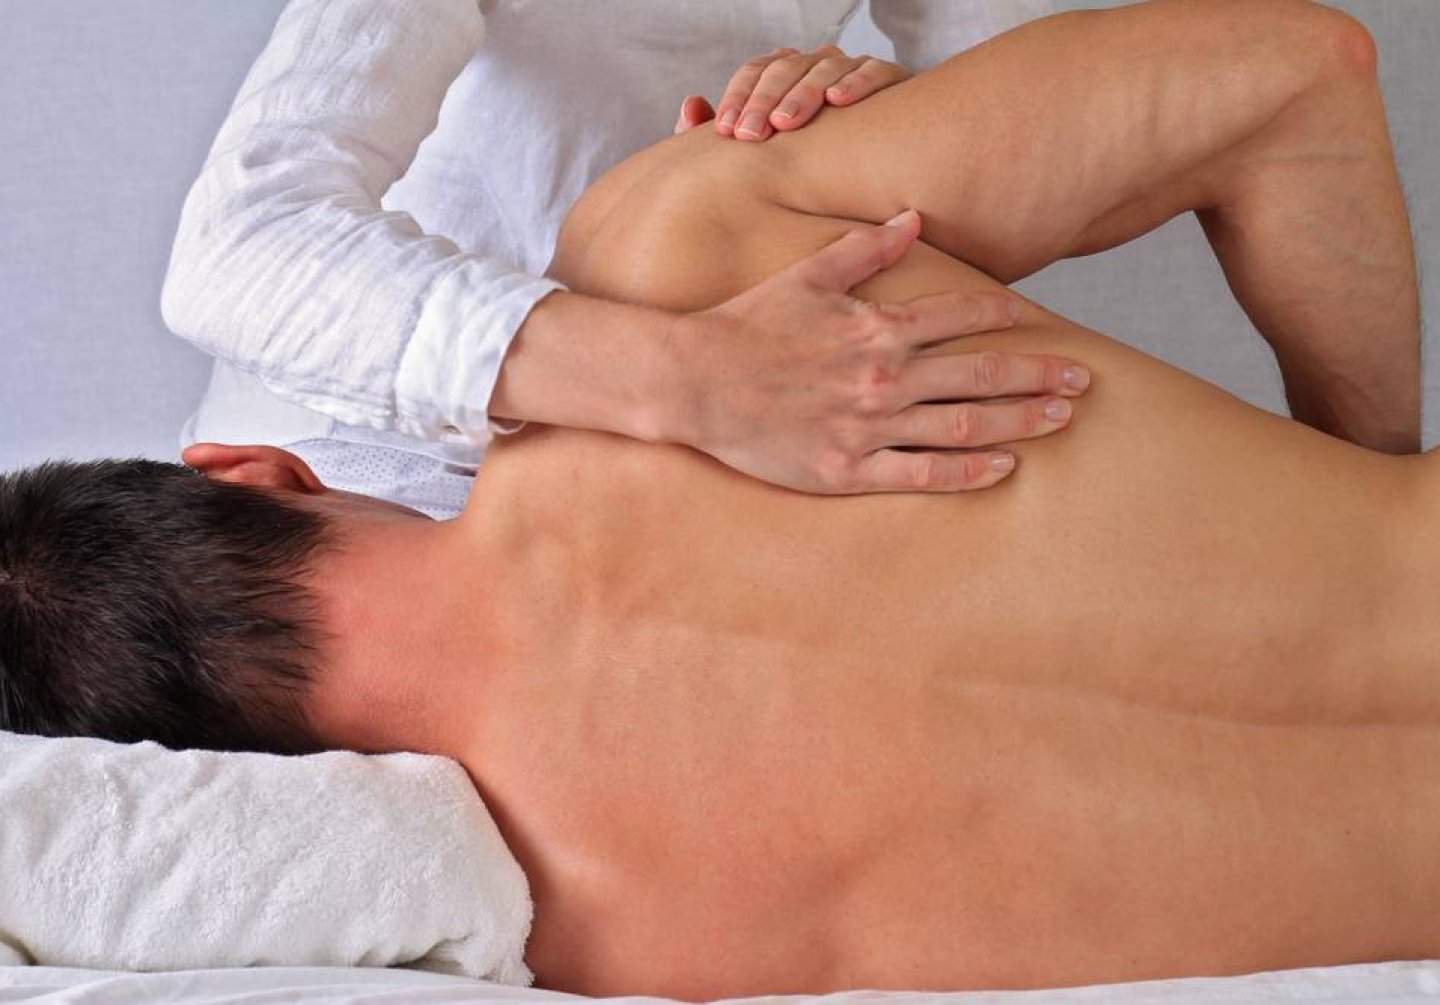 Chiropractic,,Osteopathy,,Manual,Therapy.therapist,Doing,Healing,Treatment,On,Man's,Back.